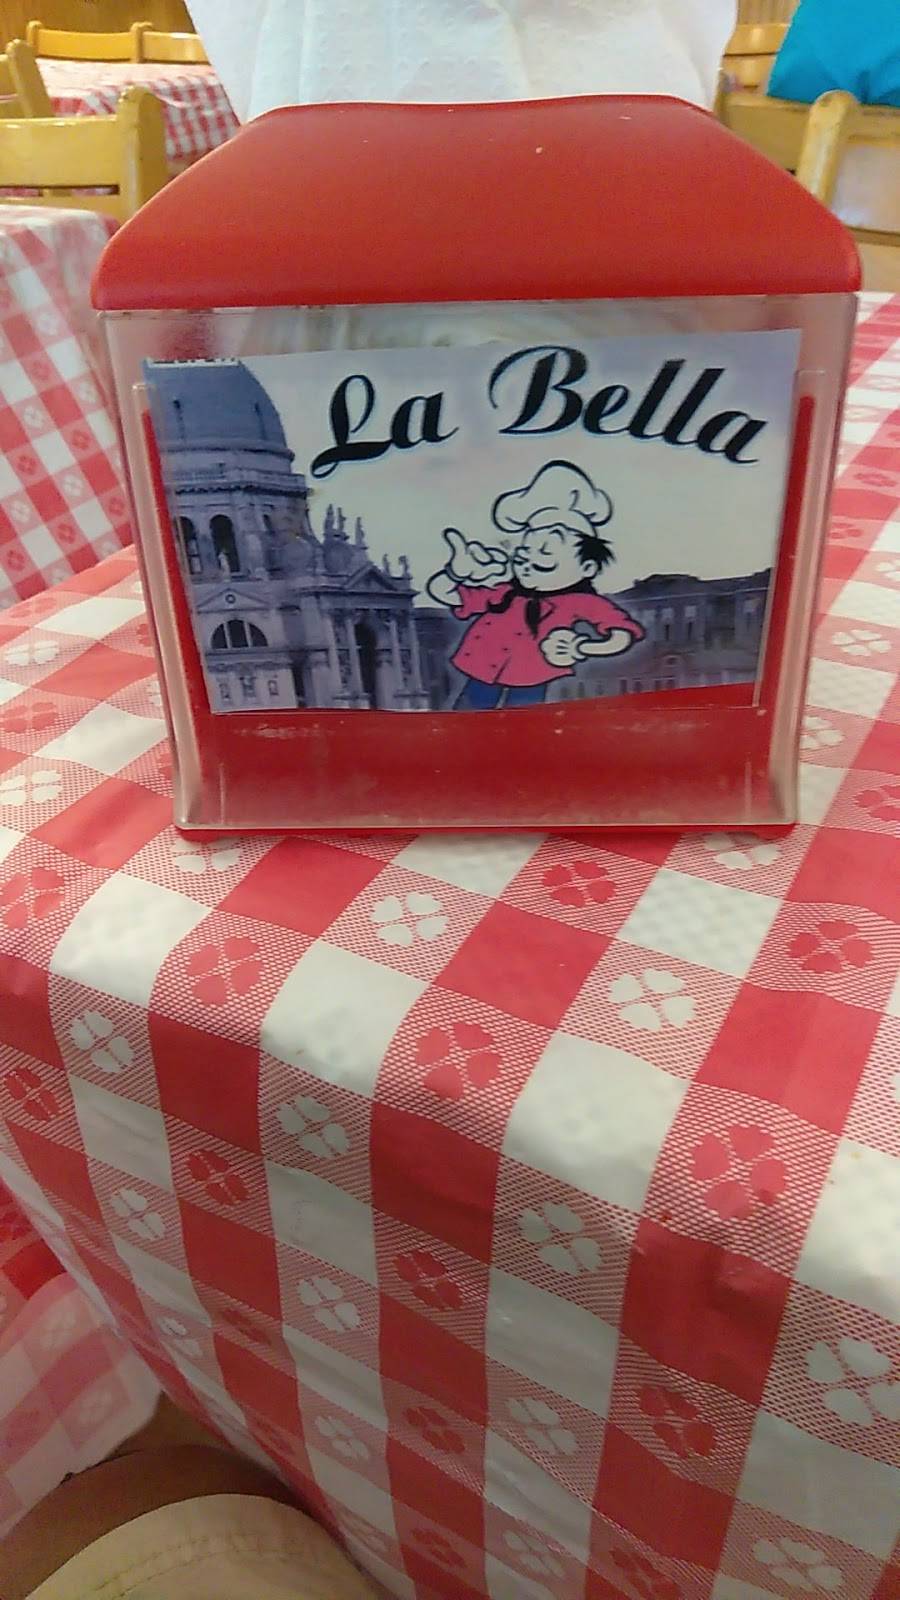 La Bella | meal delivery | 1566 Central Park Ave, Yonkers, NY 10710, USA | 9149616628 OR +1 914-961-6628